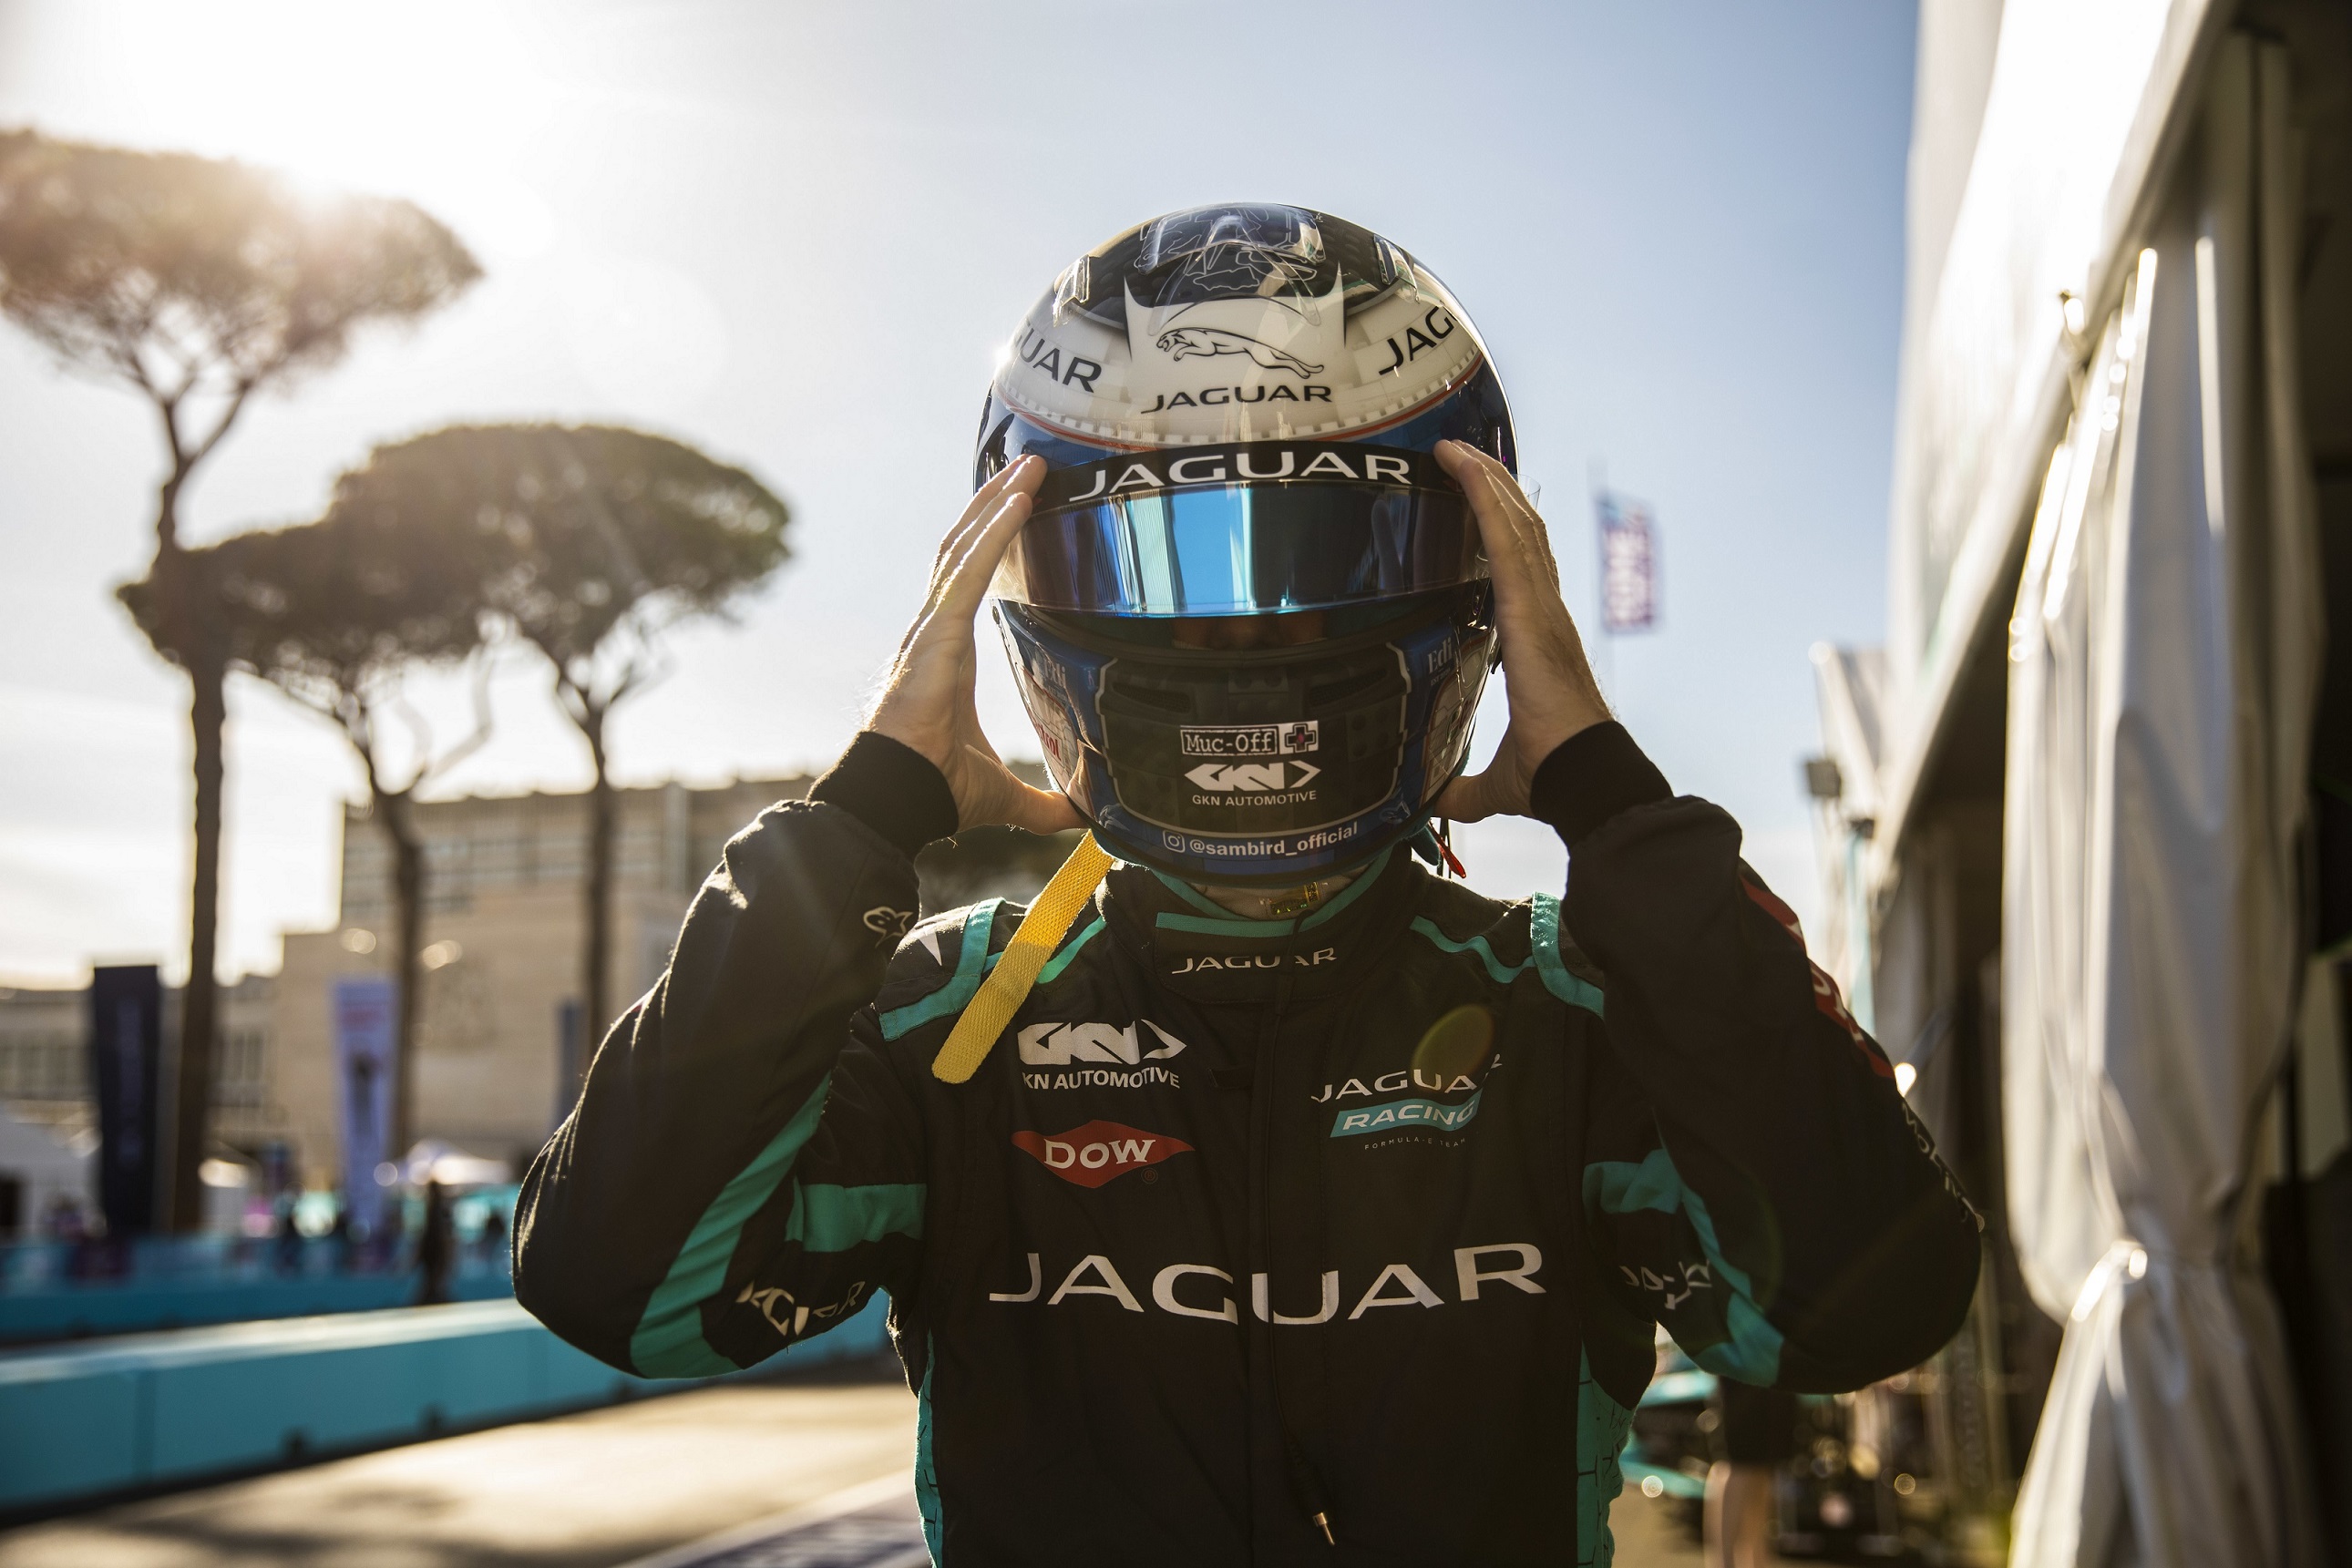 Jaguar racing head to valencia sitting top of drivers’ and teams’ championship standings